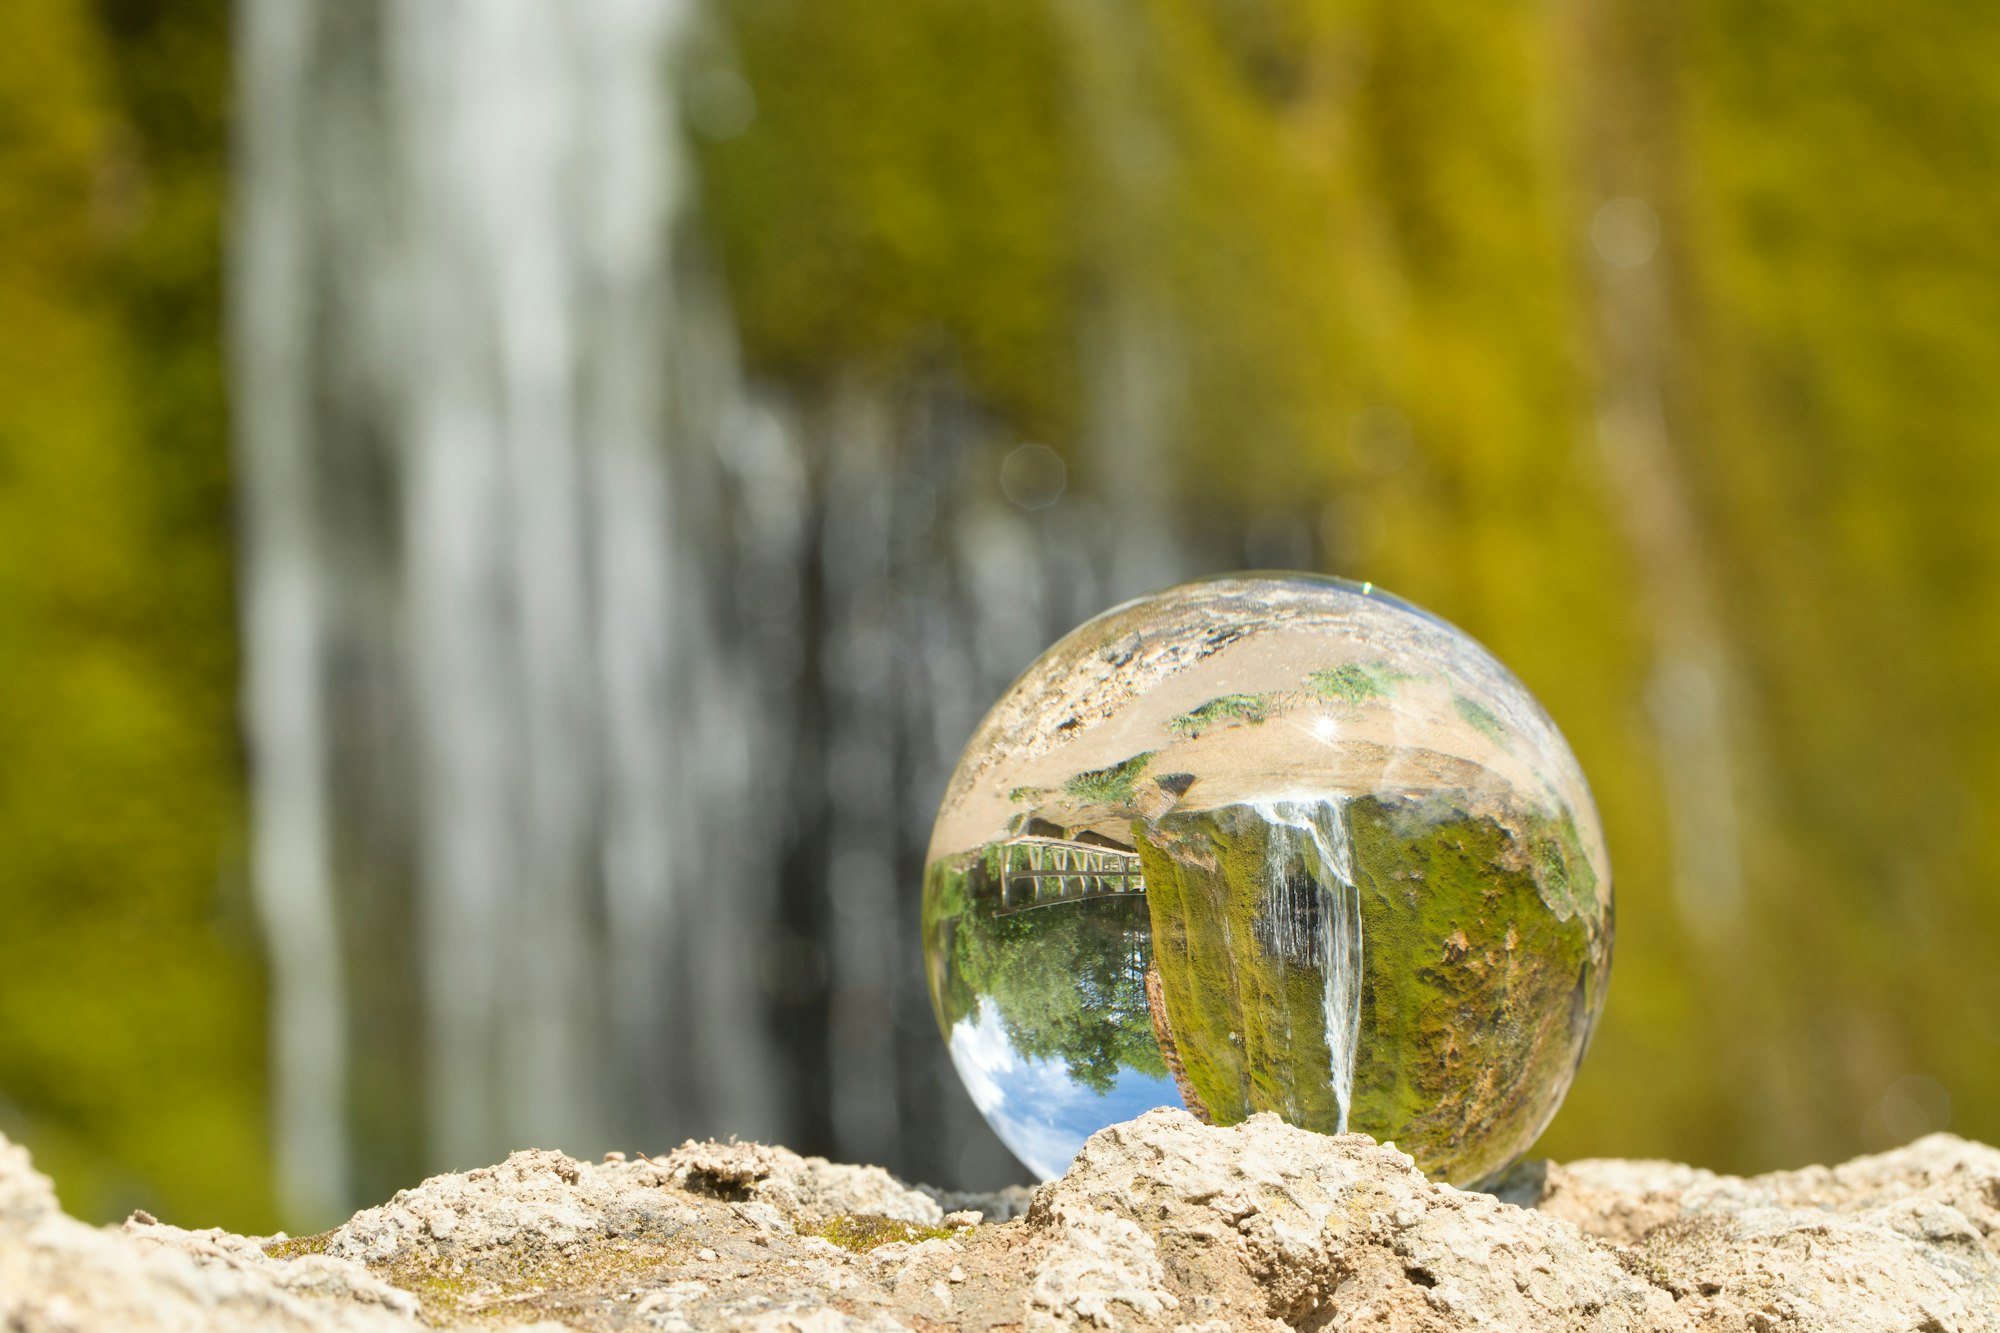 Lensball on a rock at the "Dreimühlen" - waterfall in Germany